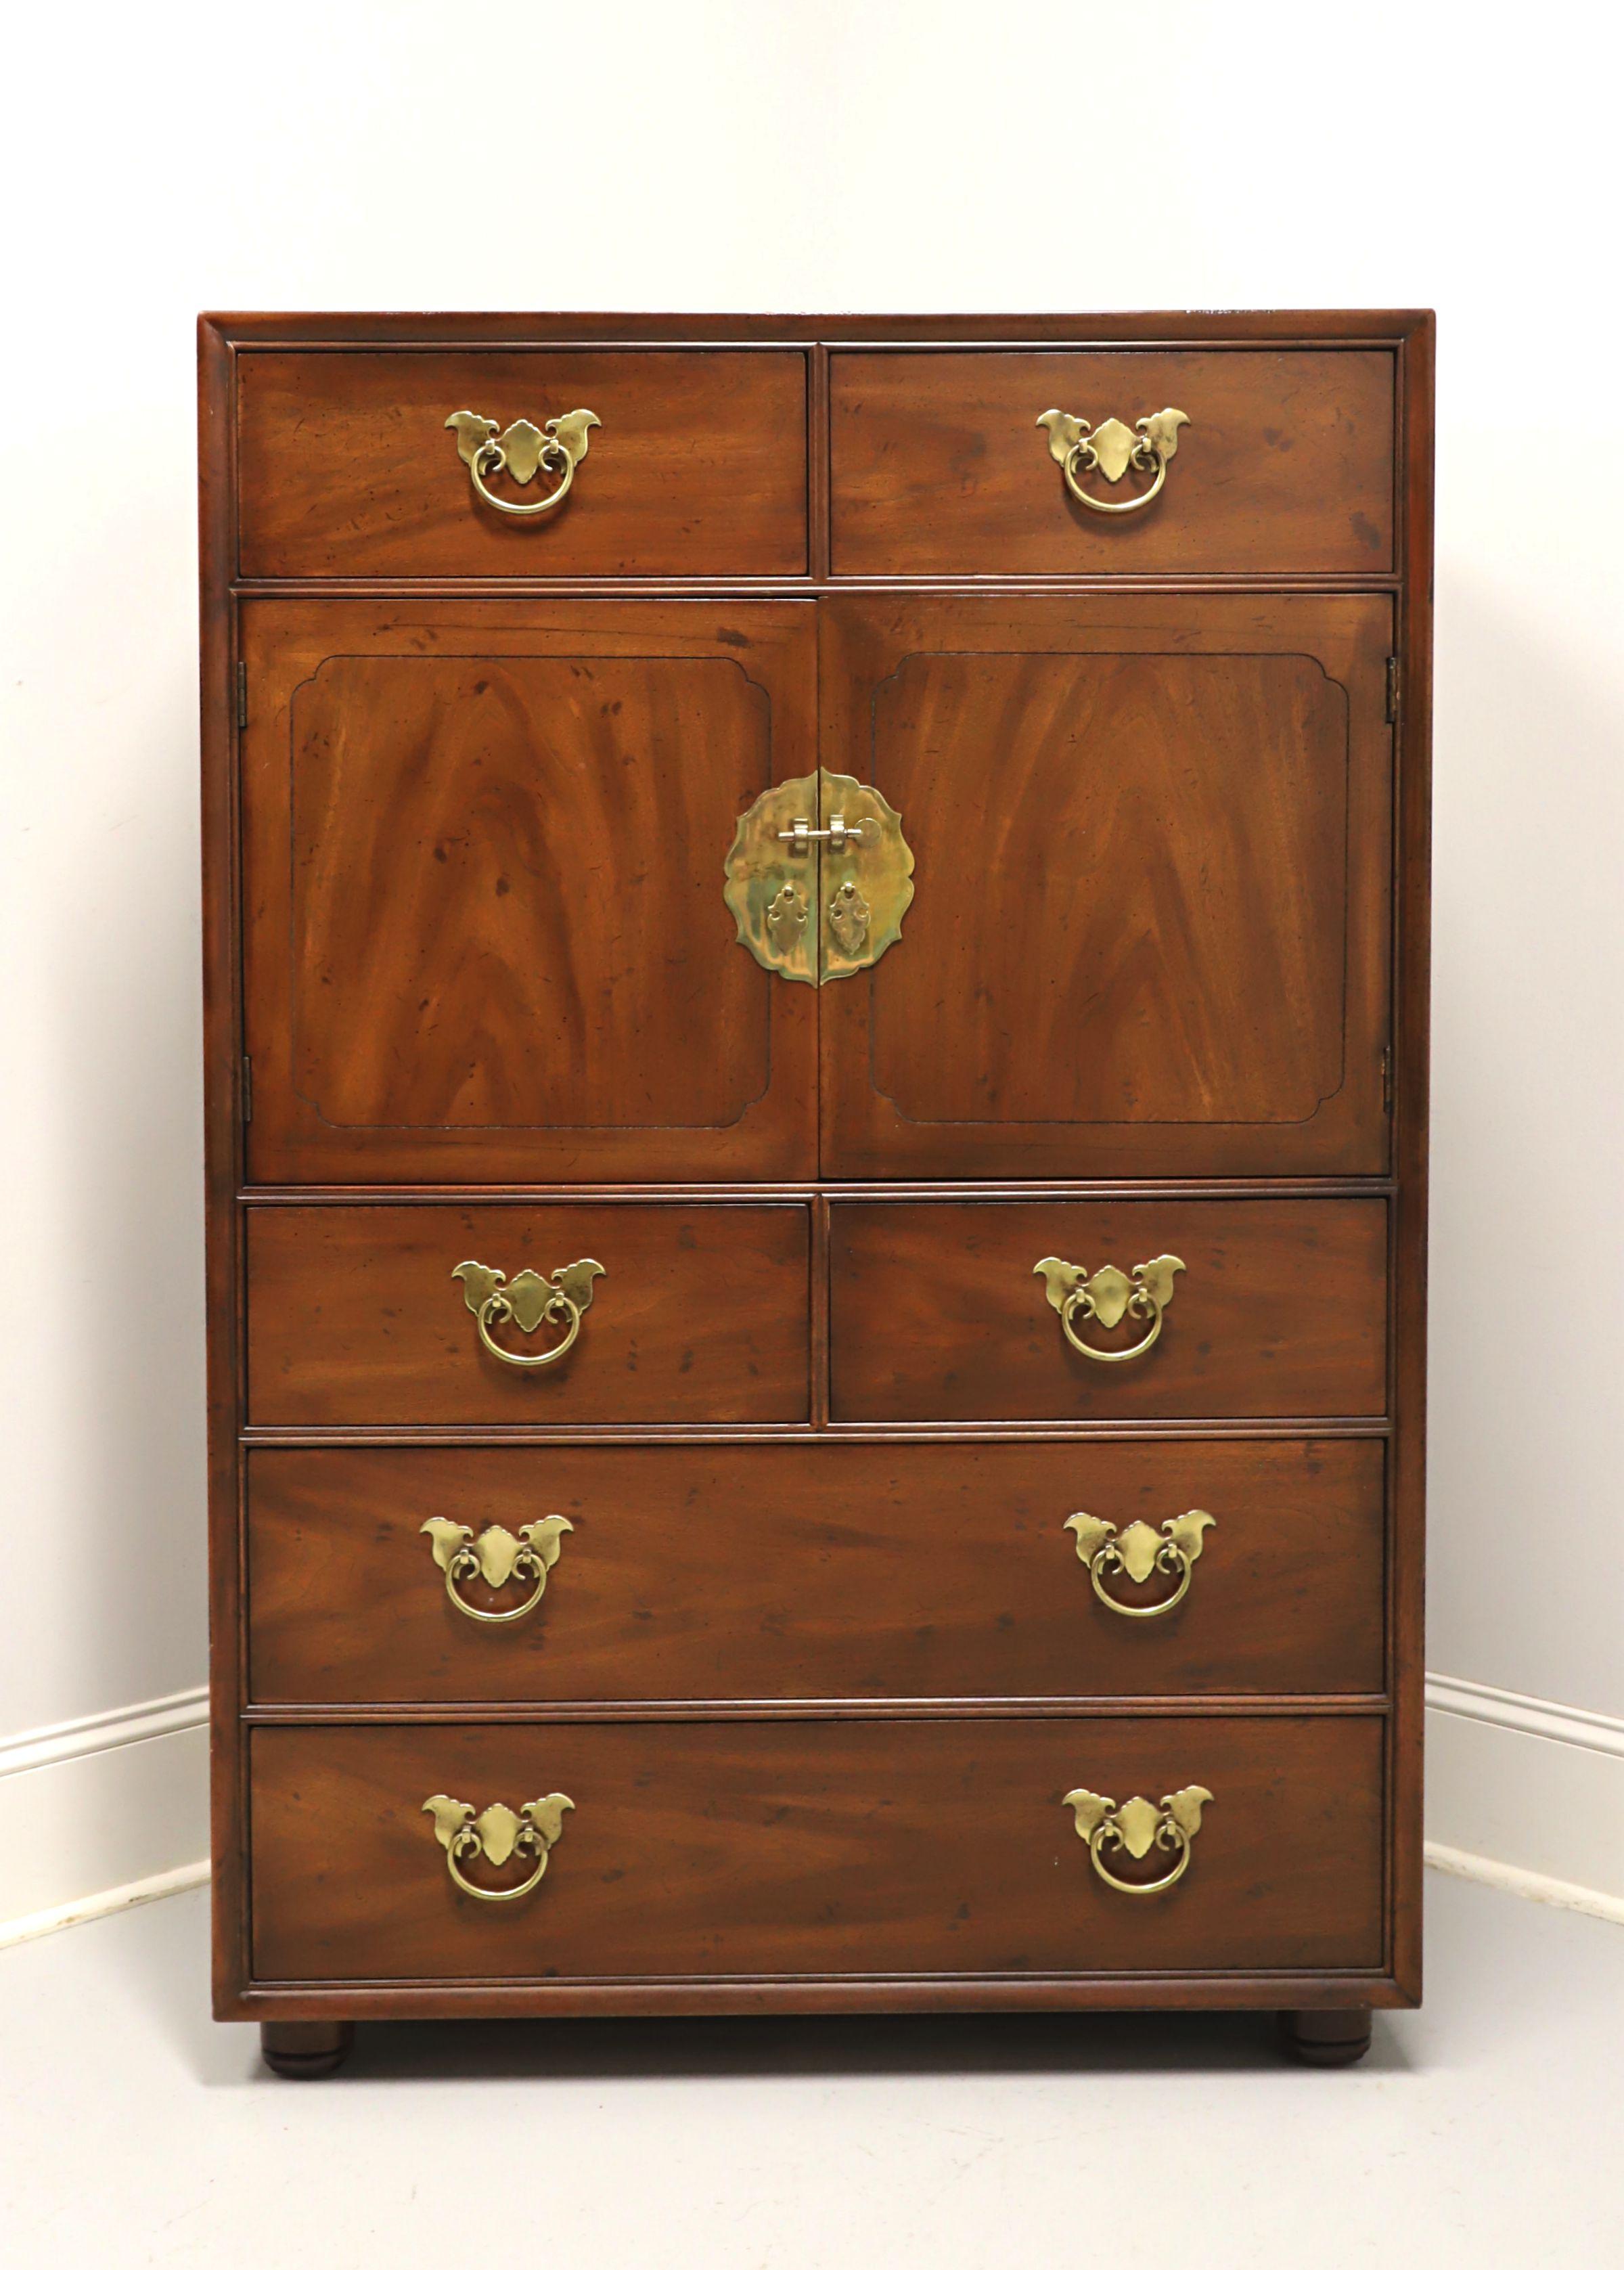 An Asian chinoiserie style gentleman's chest by Henredon. Mahogany with slightly distressed finish, decorative brass hardware, flame mahogany to door fronts, and bun feet. Features a center two door cabinet revealing an interior of six fixed